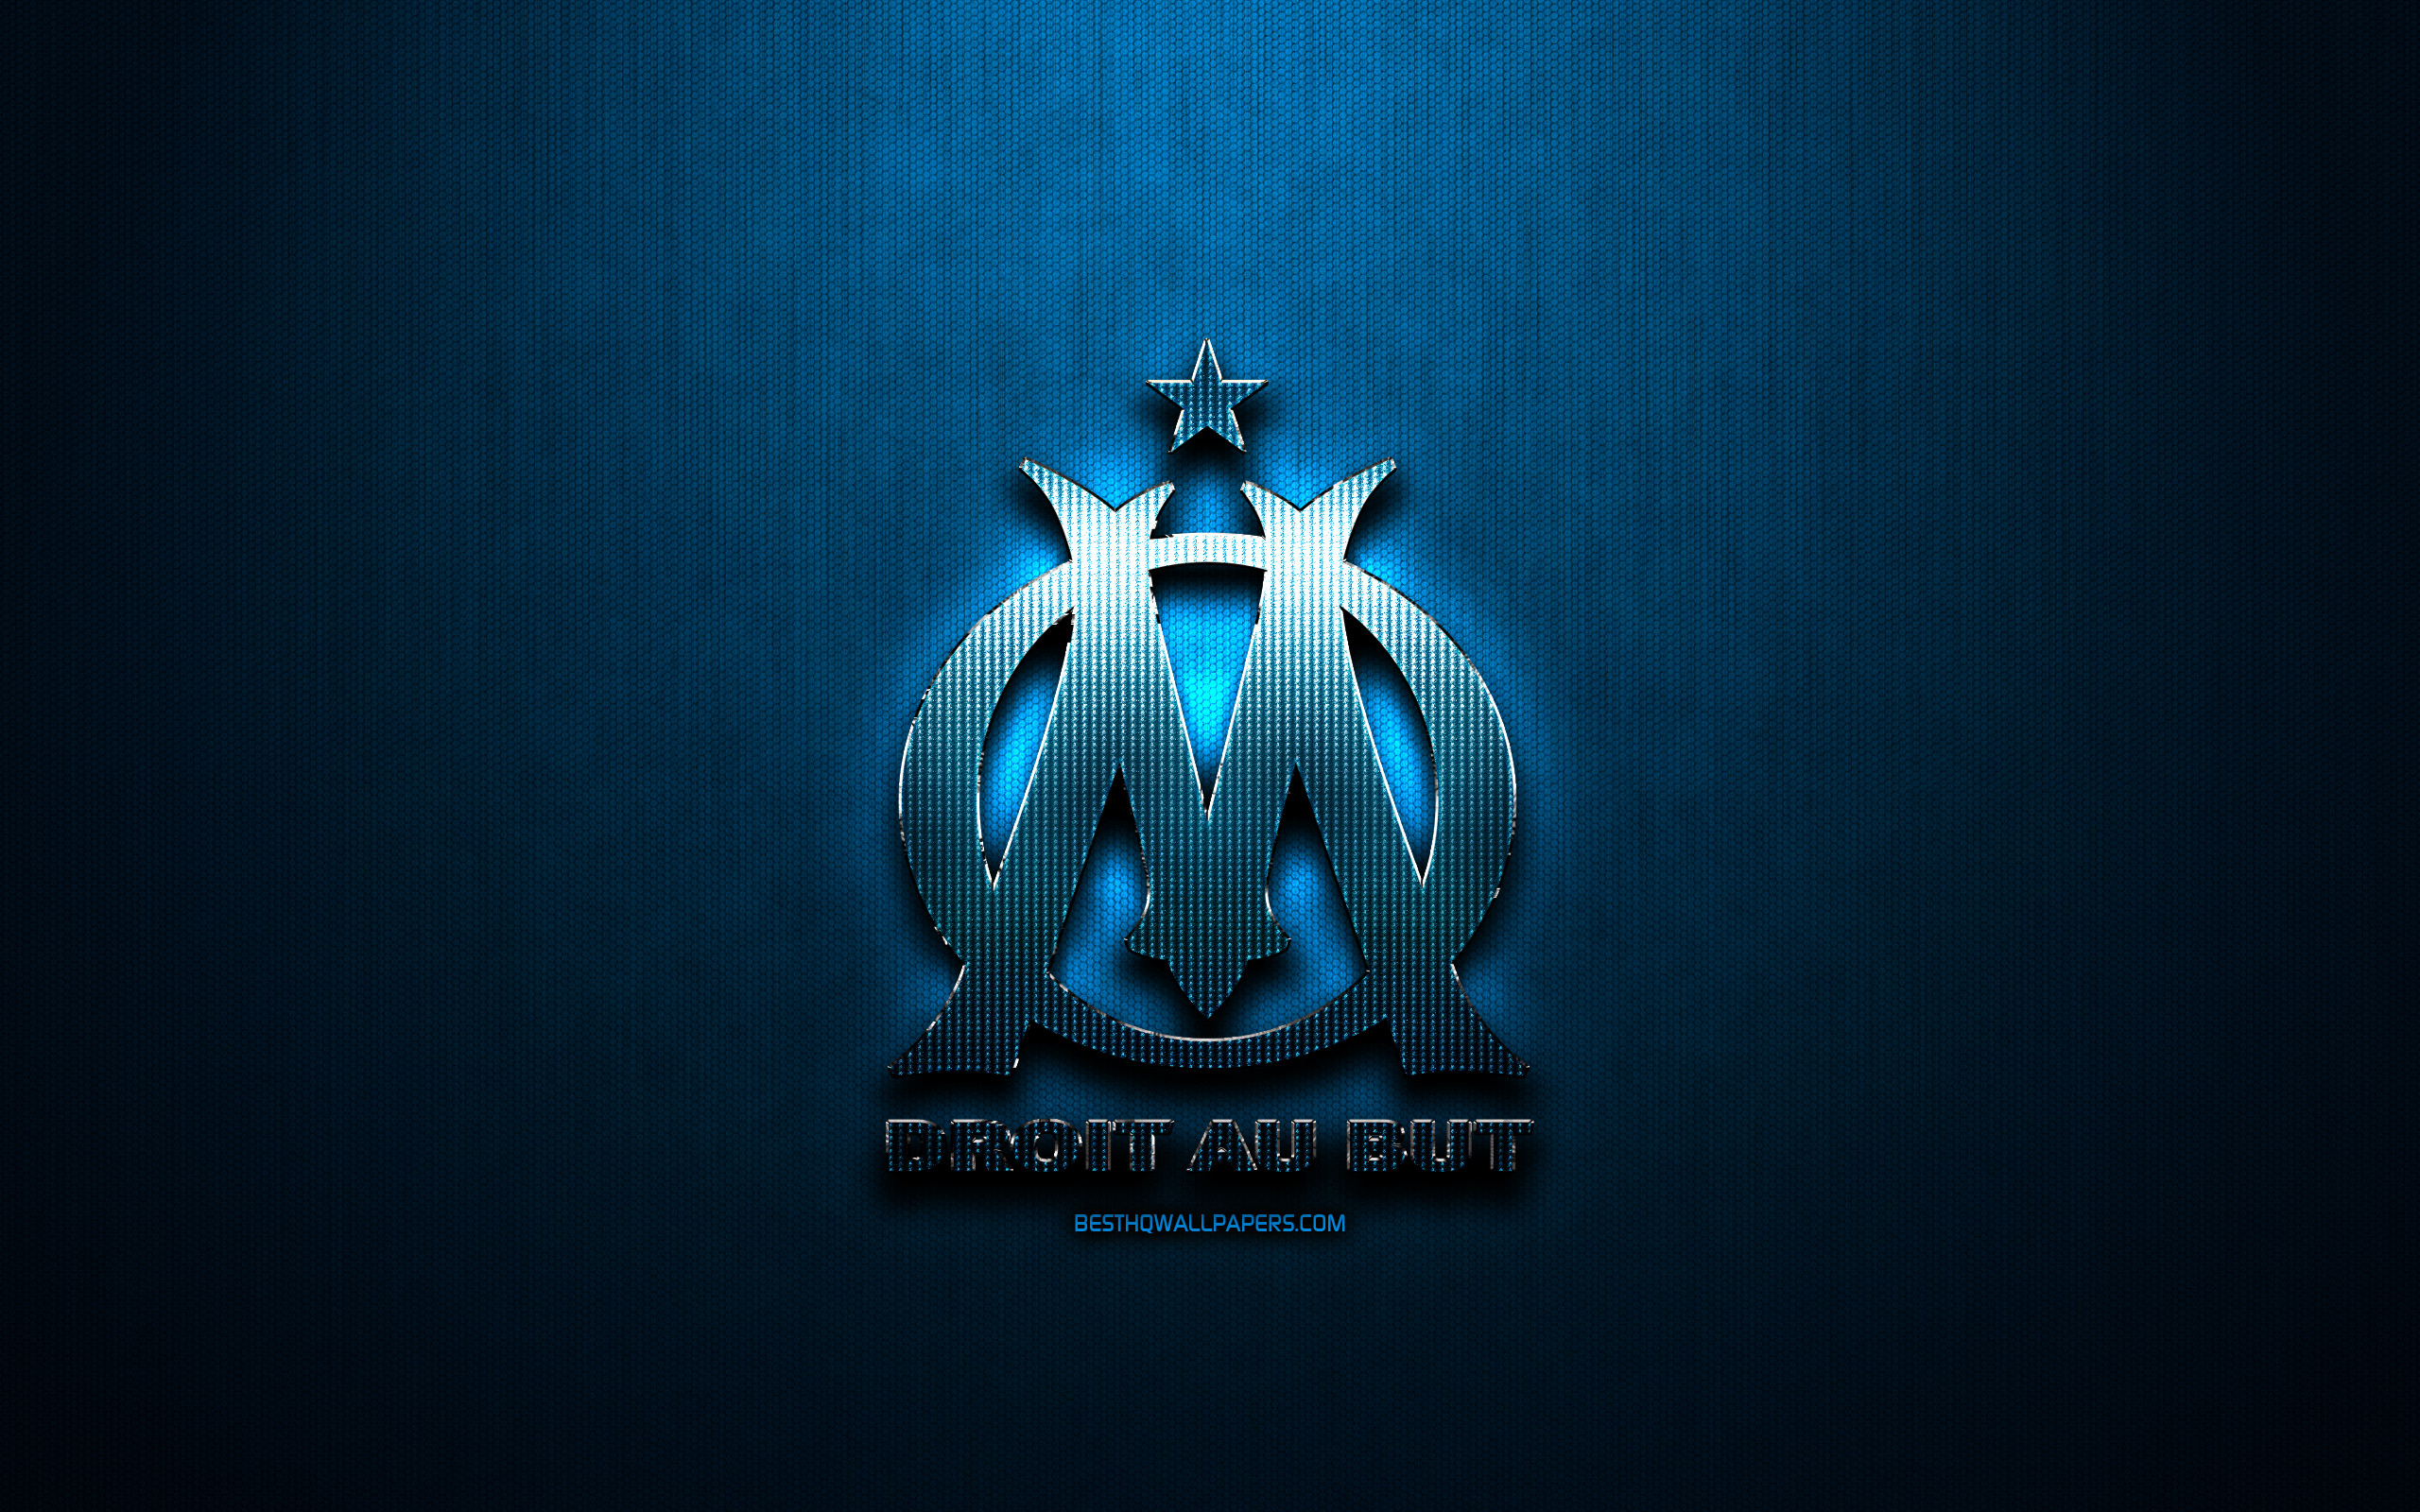 Download wallpapers olympique marseille fc blue metal background ligue french football club fan art olympique marseille logo football soccer marseille fc france for desktop with resolution x high quality hd pictures